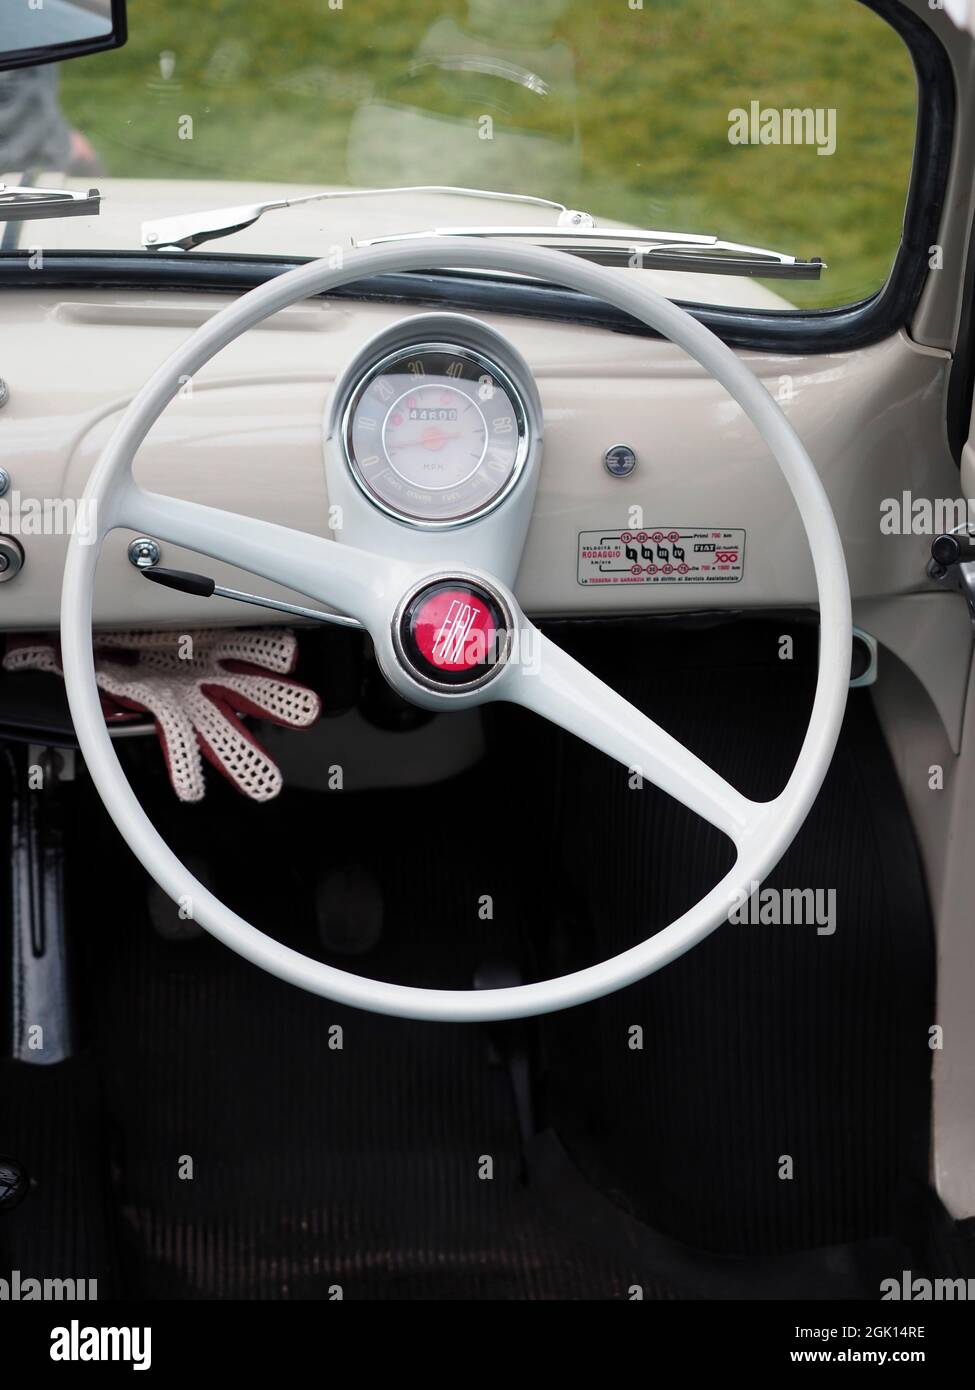 Fiat 500 interior with driving gloves Stock Photo